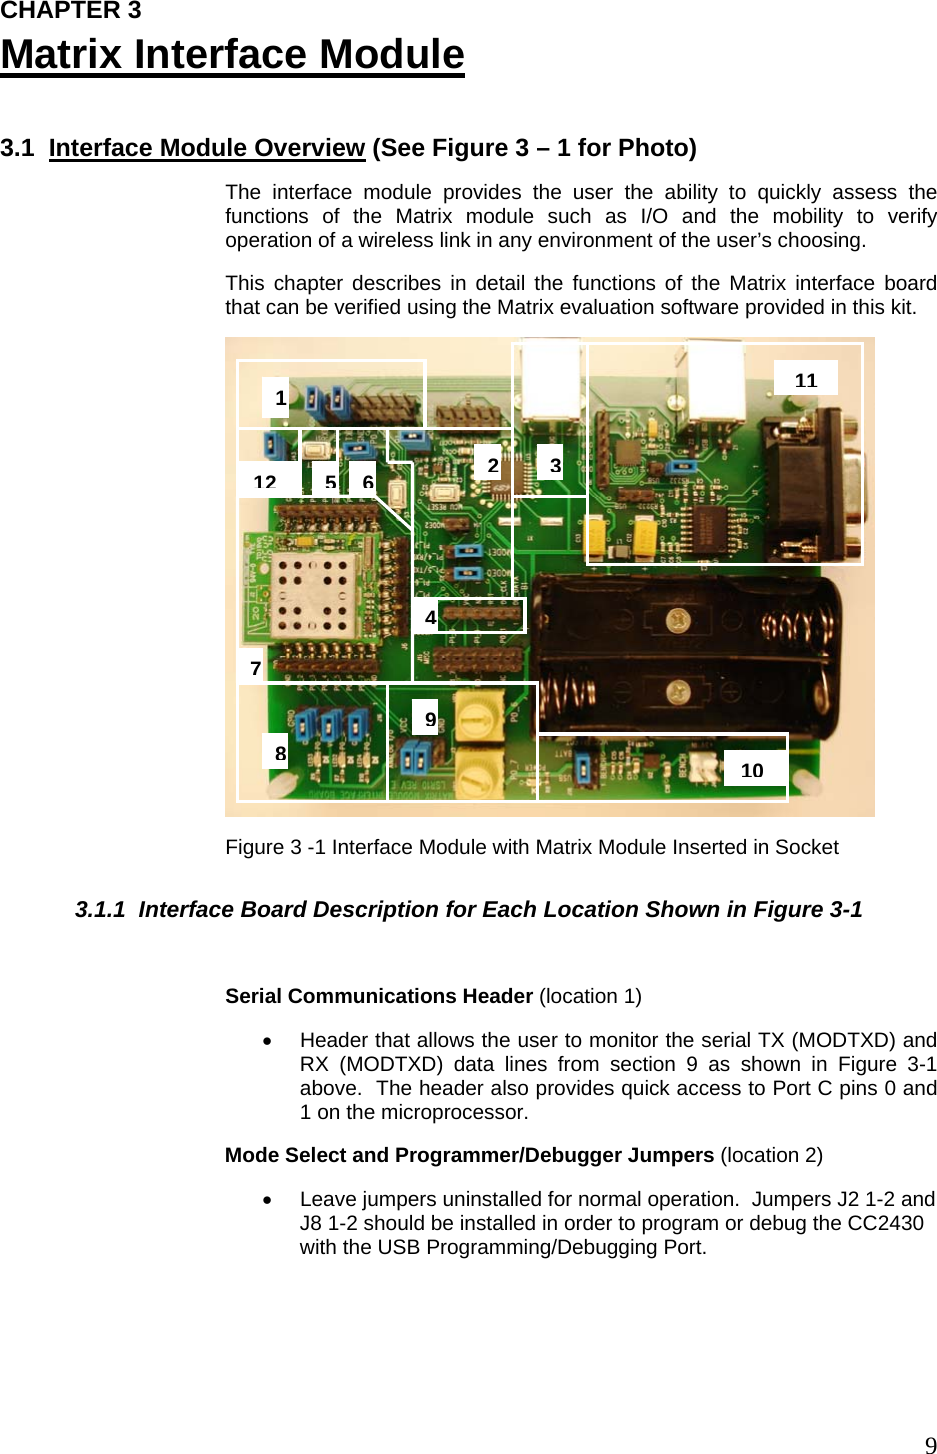  9CHAPTER 3 Matrix Interface Module  3.1  Interface Module Overview (See Figure 3 – 1 for Photo) The interface module provides the user the ability to quickly assess the functions of the Matrix module such as I/O and the mobility to verify operation of a wireless link in any environment of the user’s choosing.   This chapter describes in detail the functions of the Matrix interface board that can be verified using the Matrix evaluation software provided in this kit.  Figure 3 -1 Interface Module with Matrix Module Inserted in Socket 3.1.1  Interface Board Description for Each Location Shown in Figure 3-1  Serial Communications Header (location 1) •  Header that allows the user to monitor the serial TX (MODTXD) and RX (MODTXD) data lines from section 9 as shown in Figure 3-1 above.  The header also provides quick access to Port C pins 0 and 1 on the microprocessor. Mode Select and Programmer/Debugger Jumpers (location 2) •  Leave jumpers uninstalled for normal operation.  Jumpers J2 1-2 and J8 1-2 should be installed in order to program or debug the CC2430 with the USB Programming/Debugging Port.  101 891112354276